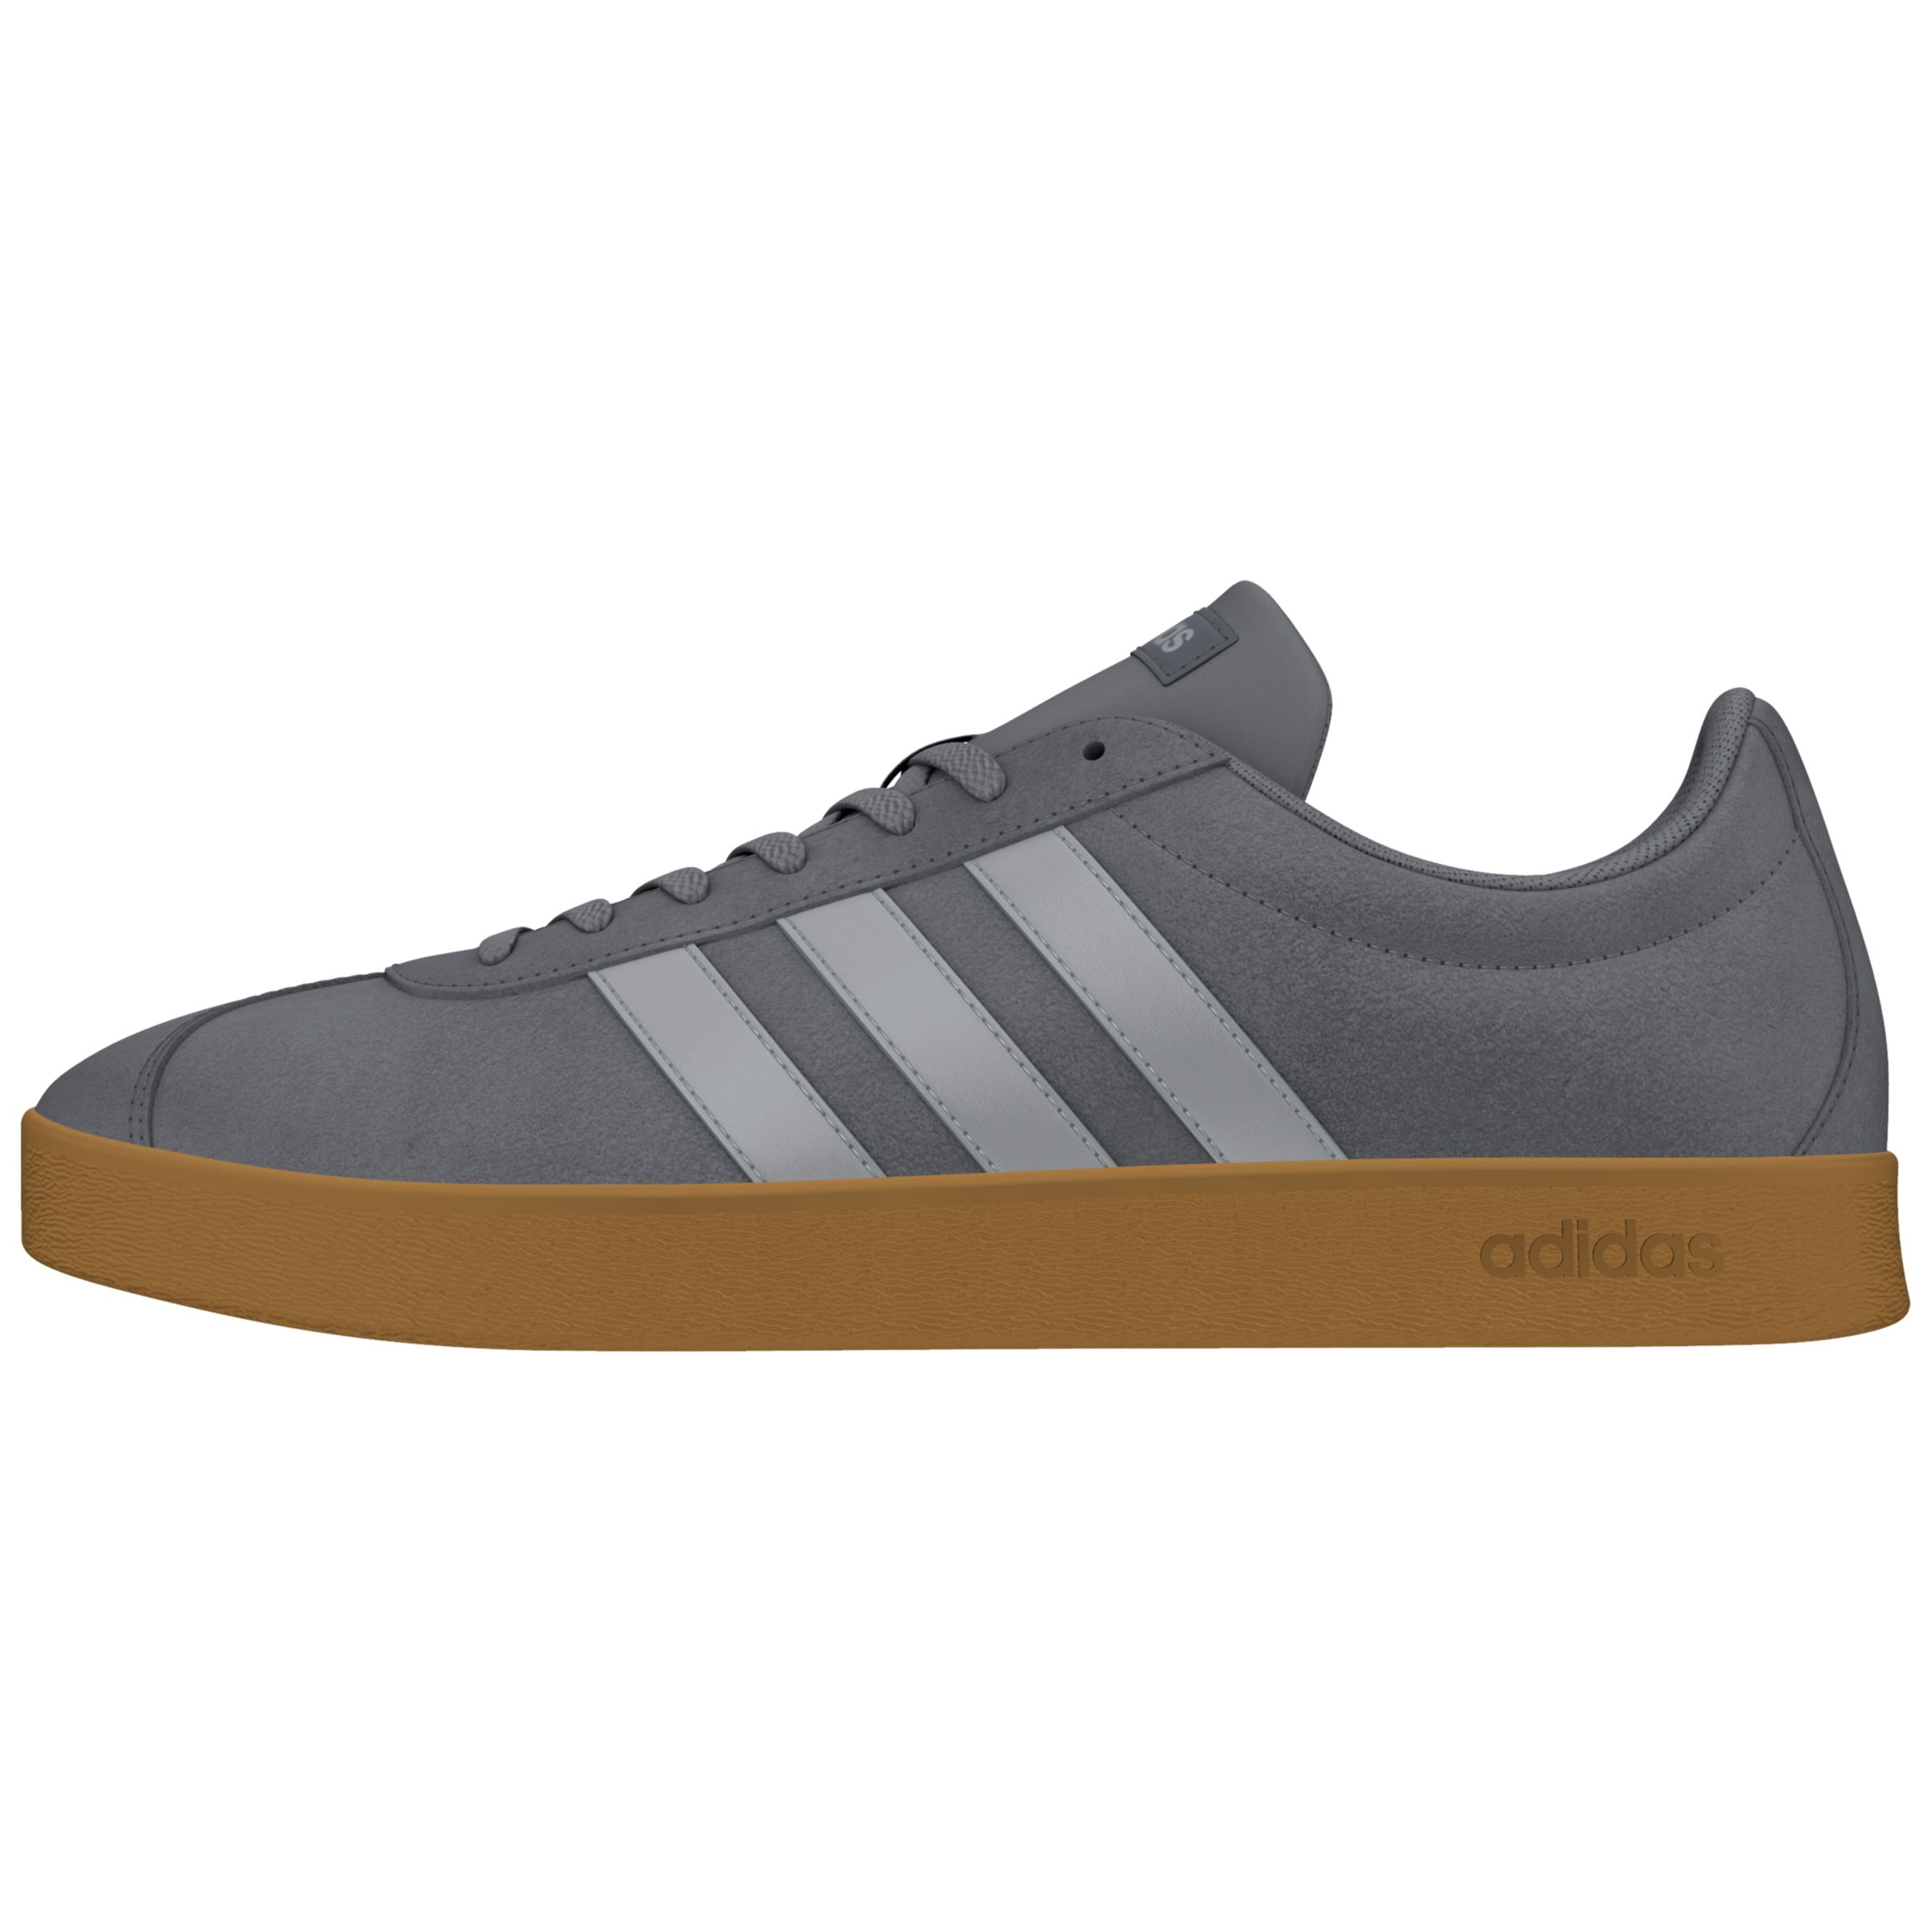 Adidas NEO VL 2.0 Court Suede Men's Trainers, Grey at John Lewis & Partners